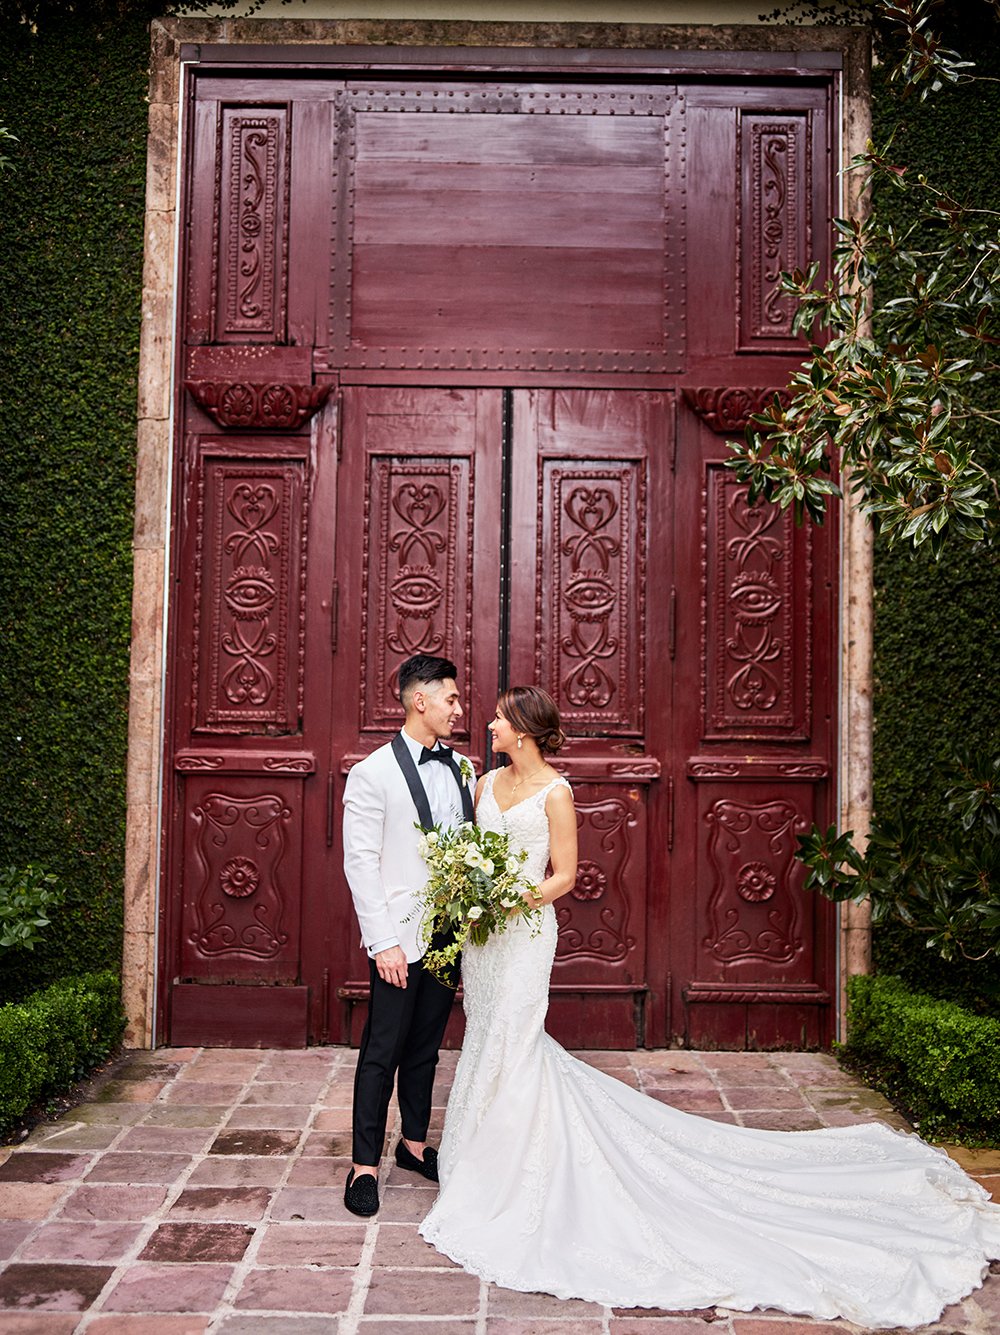 red door - wedding photography at the bell tower on 34th